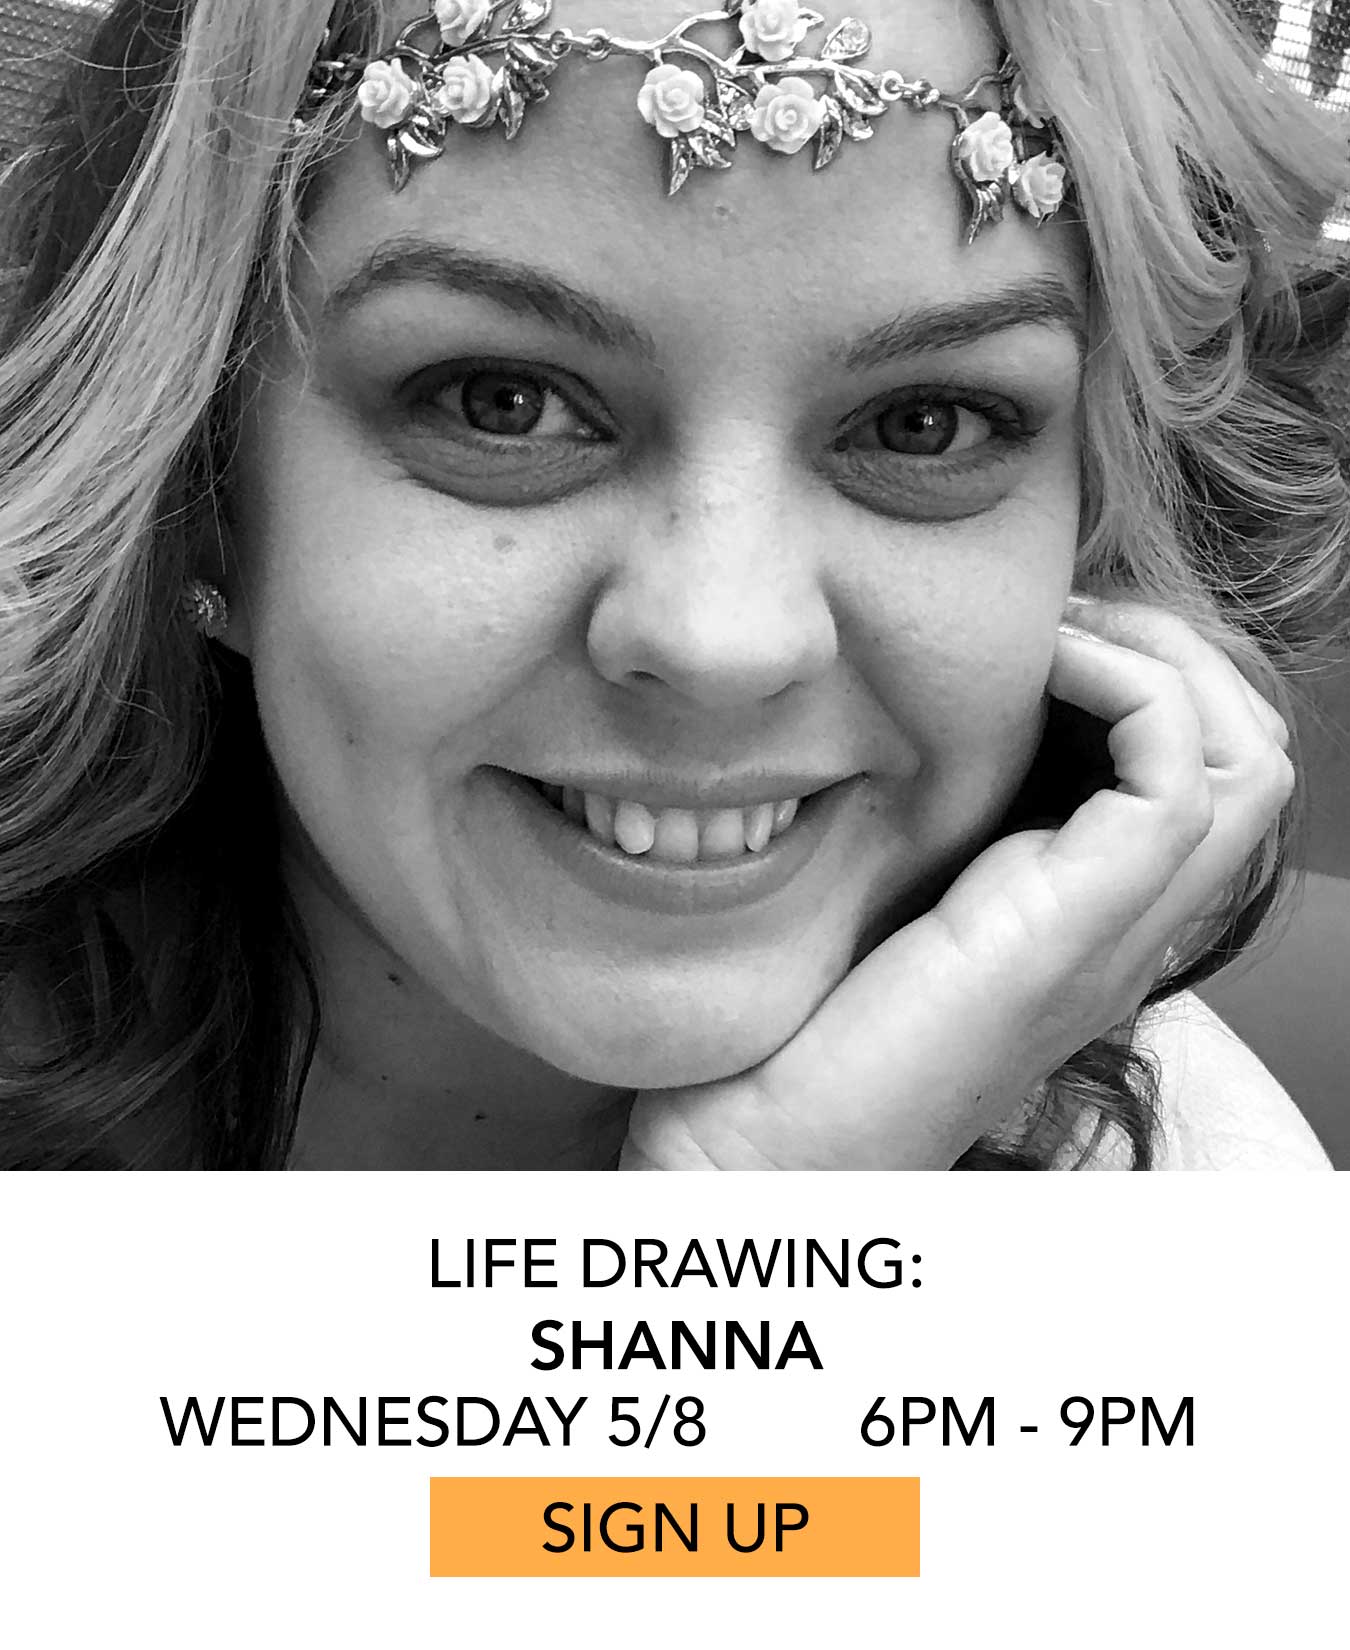 Life Drawing: Shanna. Wednesday 5/8 from 6pm to 9pm. Click to Sign Up.